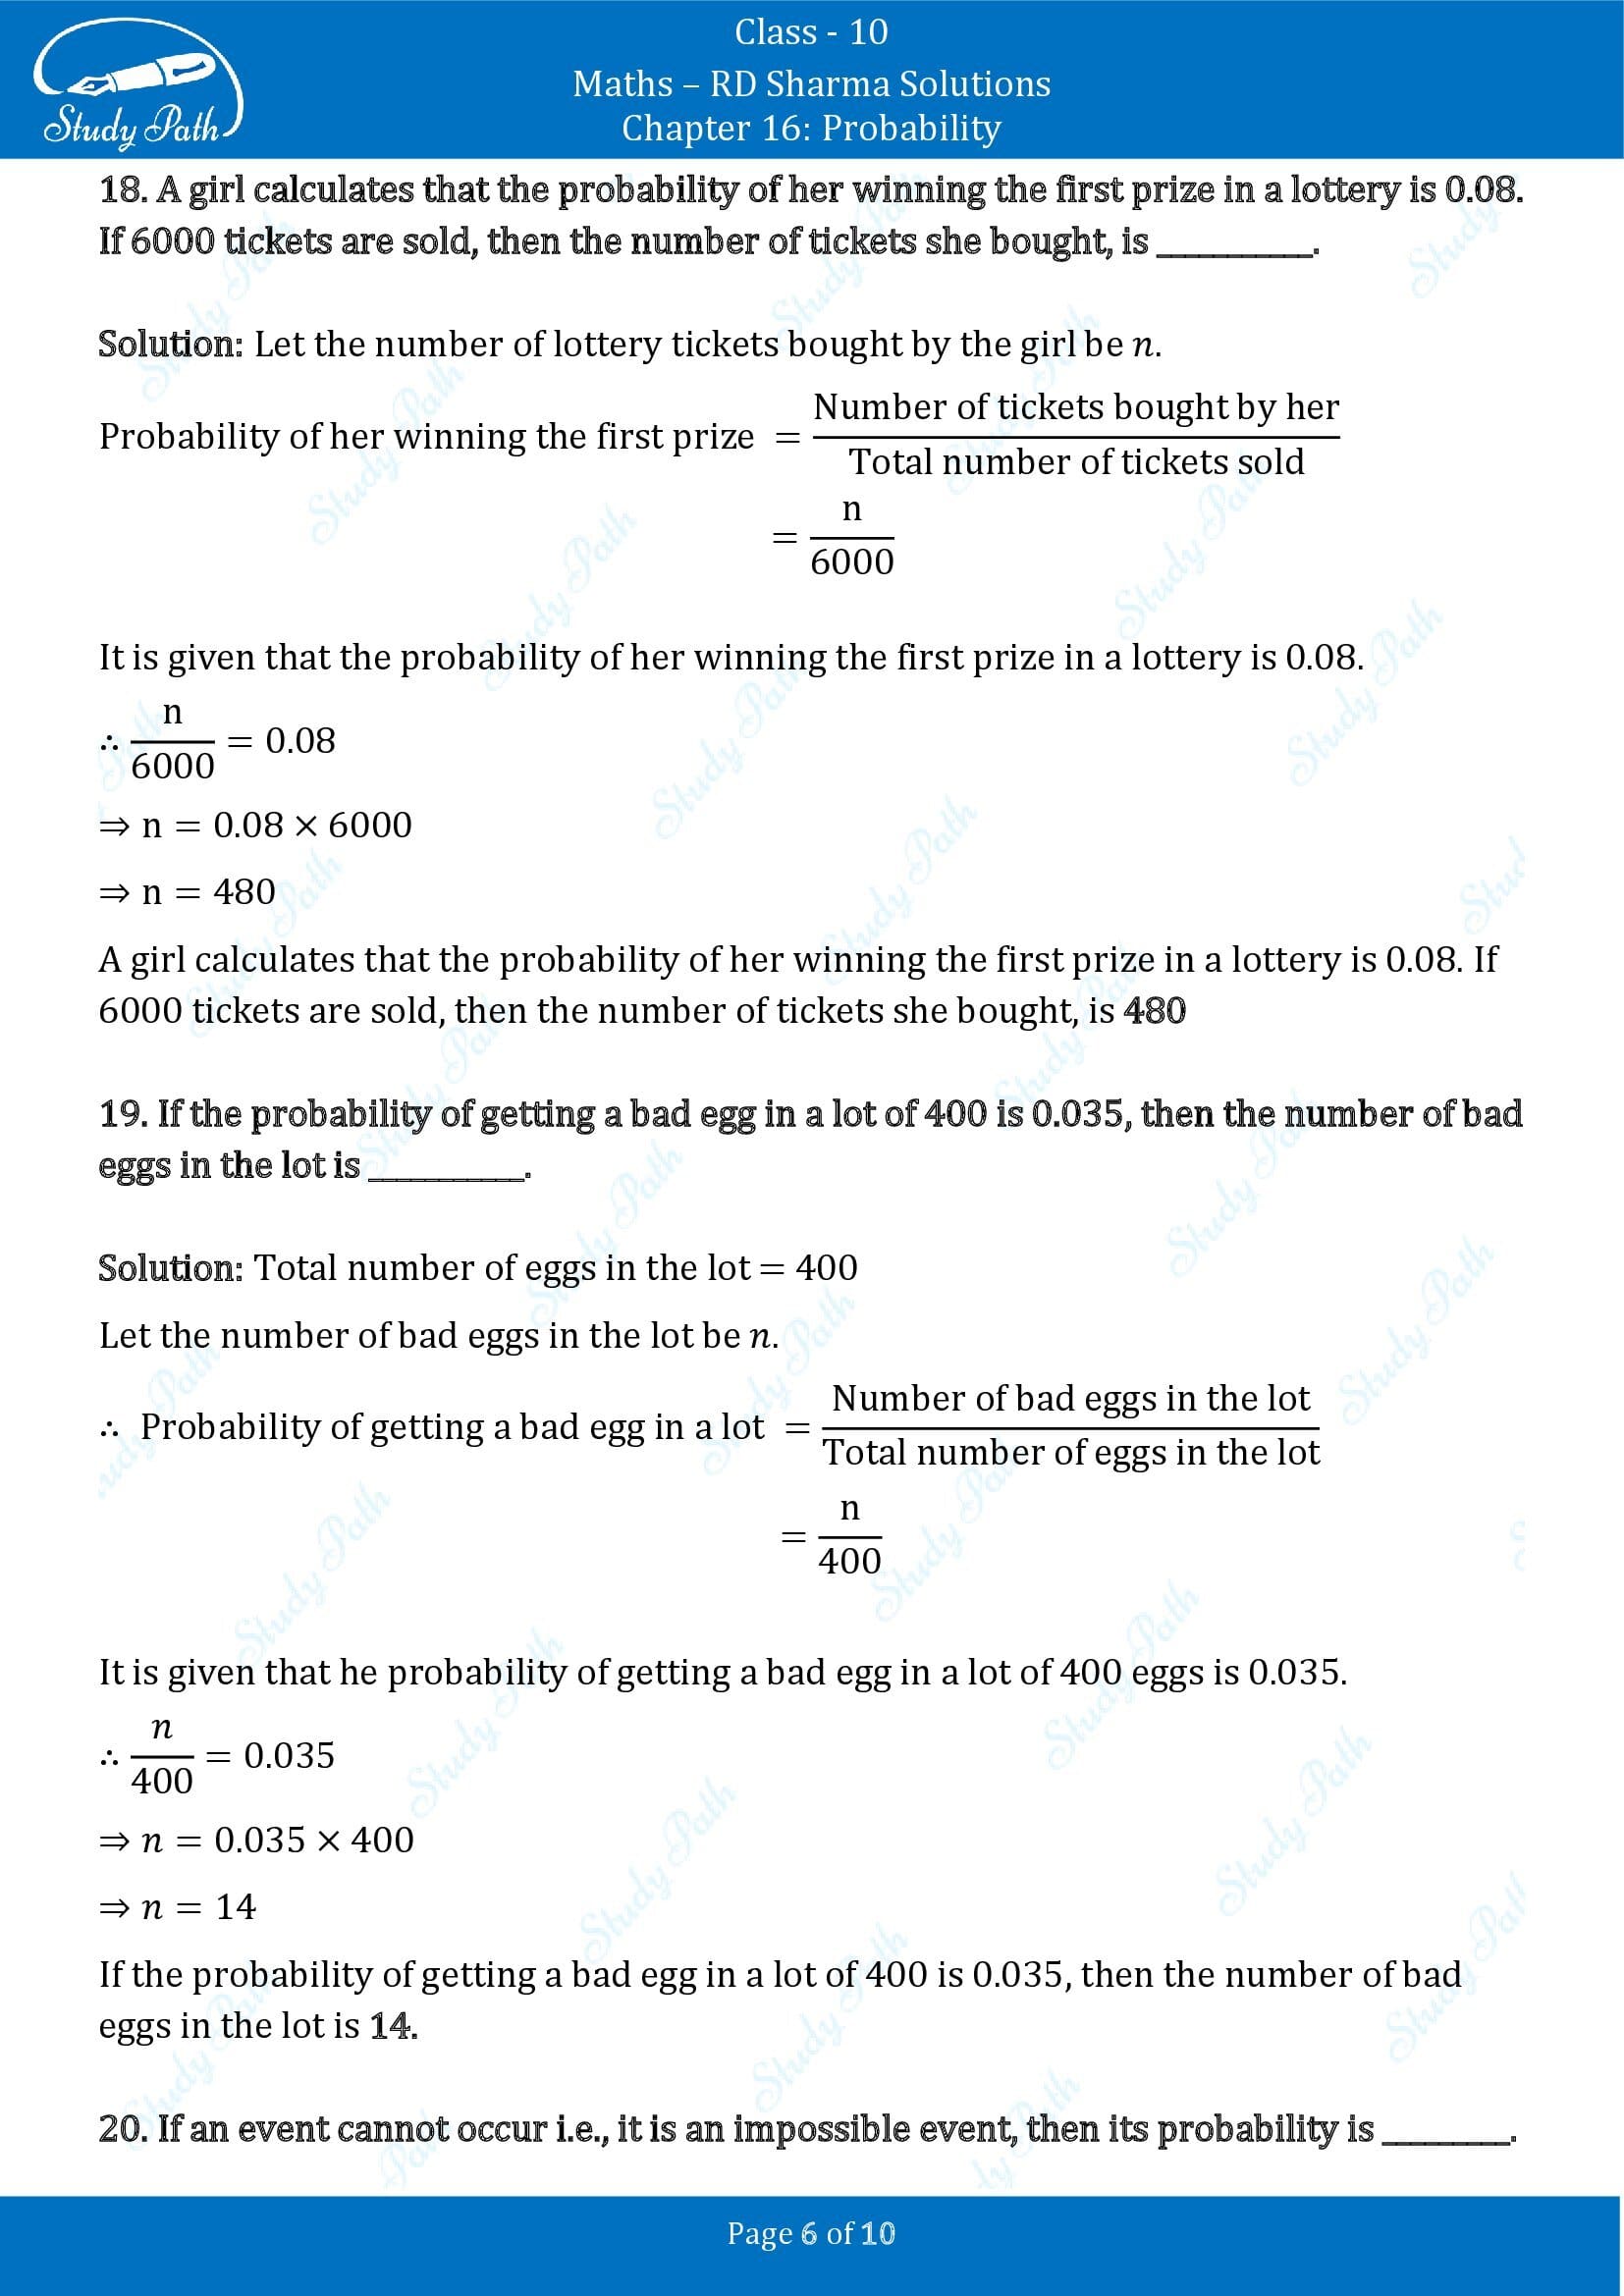 RD Sharma Solutions Class 10 Chapter 16 Probability Fill in the Blank Type Questions FBQs 00006